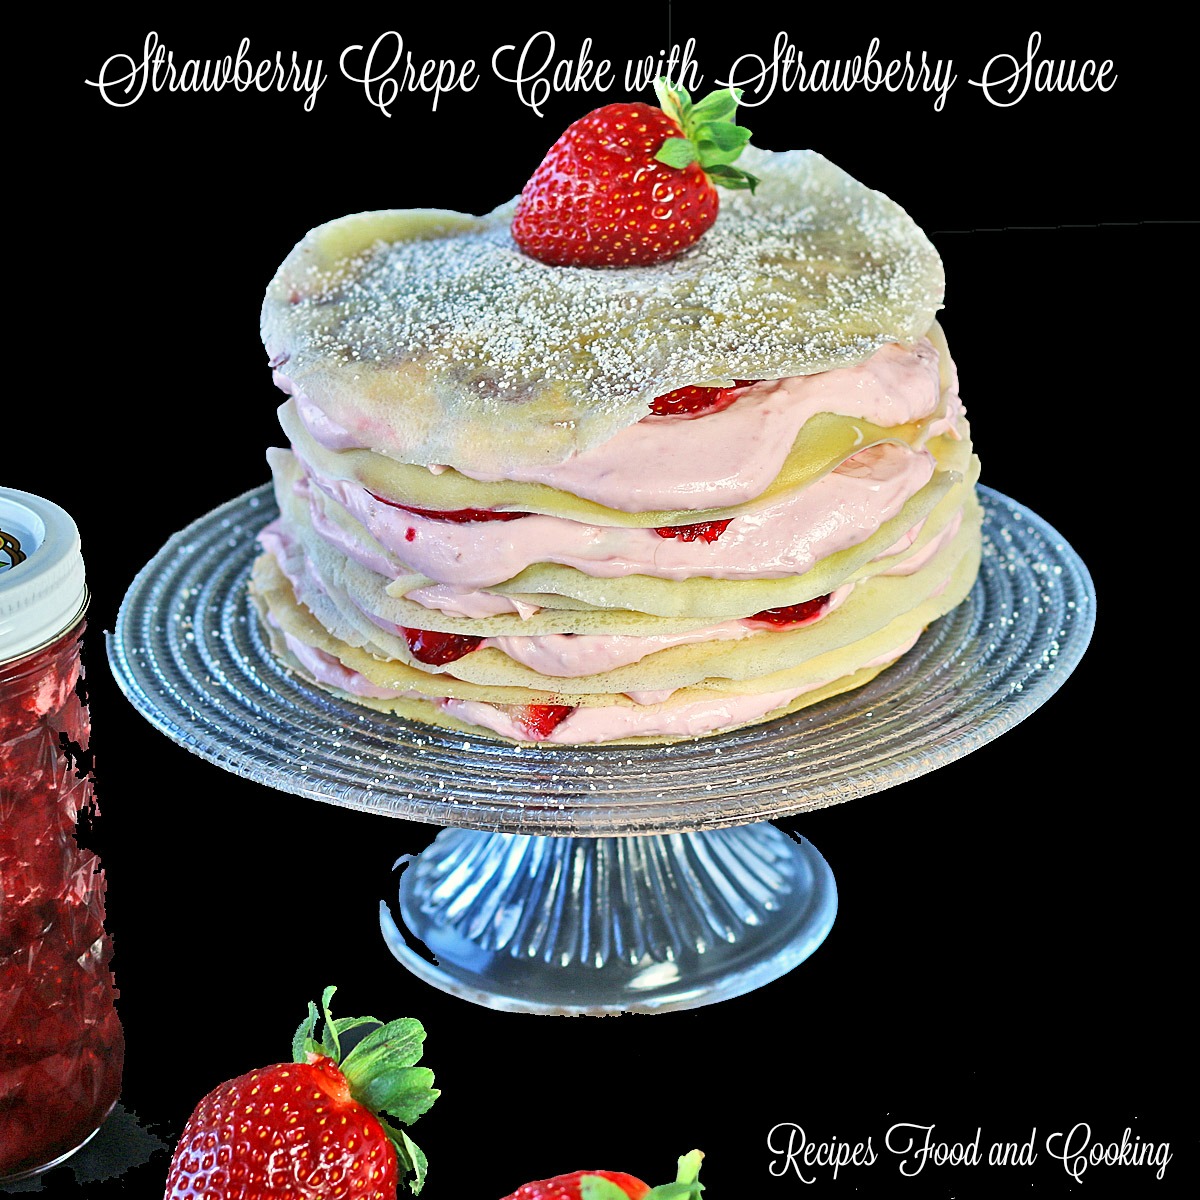 Strawberry Crepe Cake with Strawberry Sauce